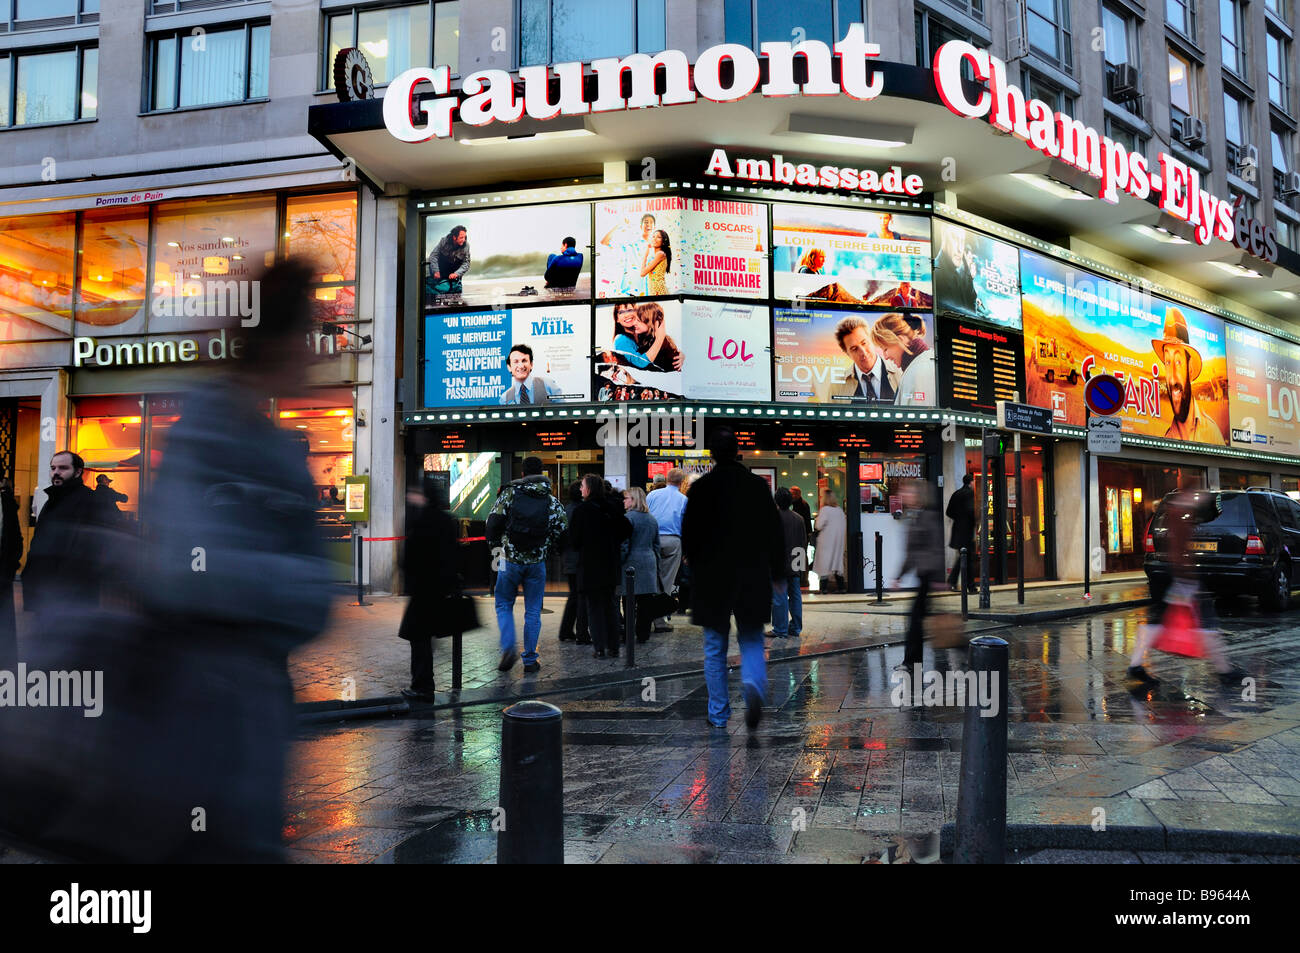 Paris Champs Elysees busy, France, Busy Street Scene Cinema Theatre, lit  up, Rain, dusk Movie Theater cinema posters Marquee, waiting outside french  Stock Photo - Alamy